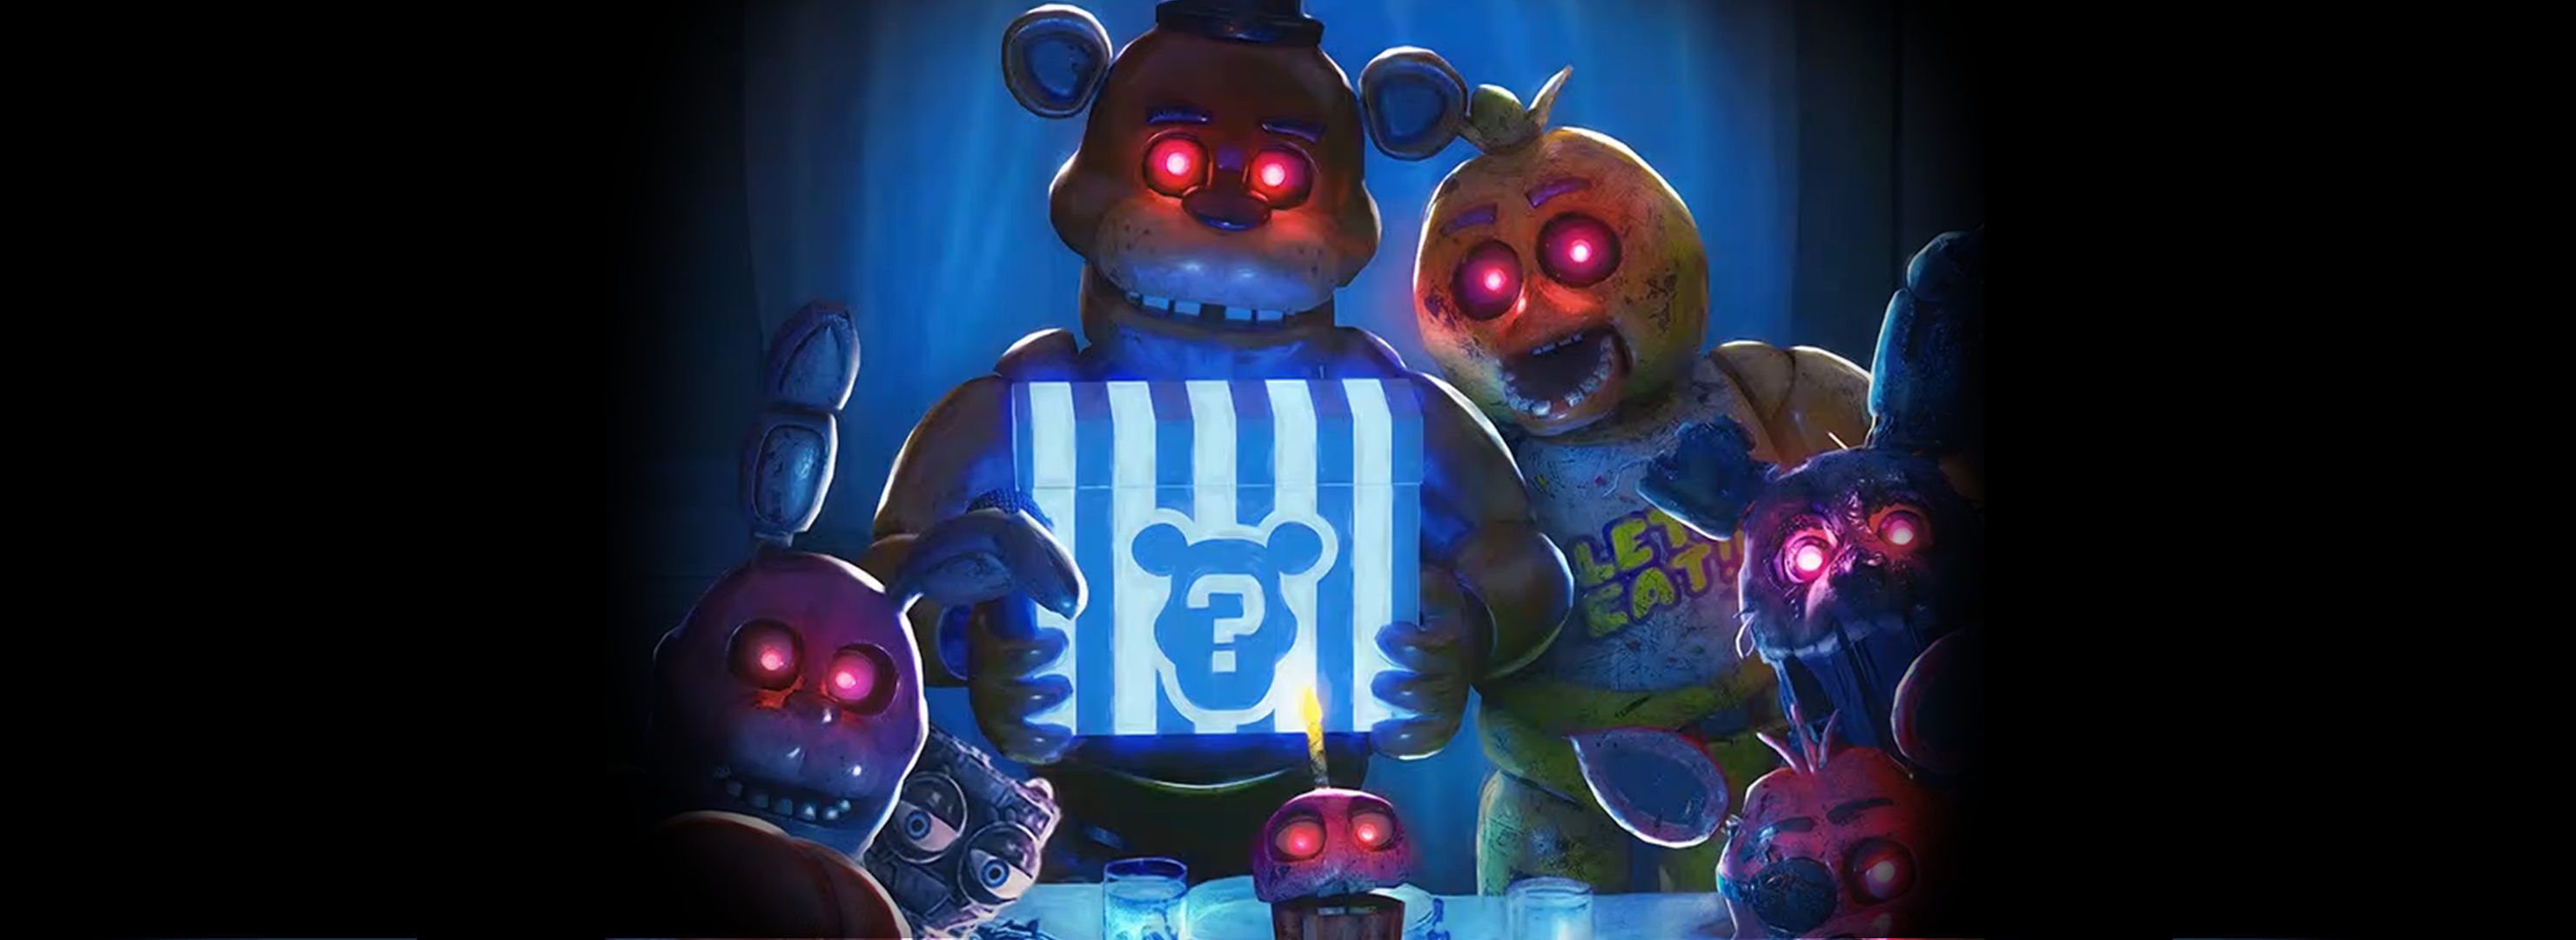 EVERYTHING YOU NEED TO KNOW ABOUT THE FNAF AR GAMEPLAY UPDATE (TUTORIAL) 